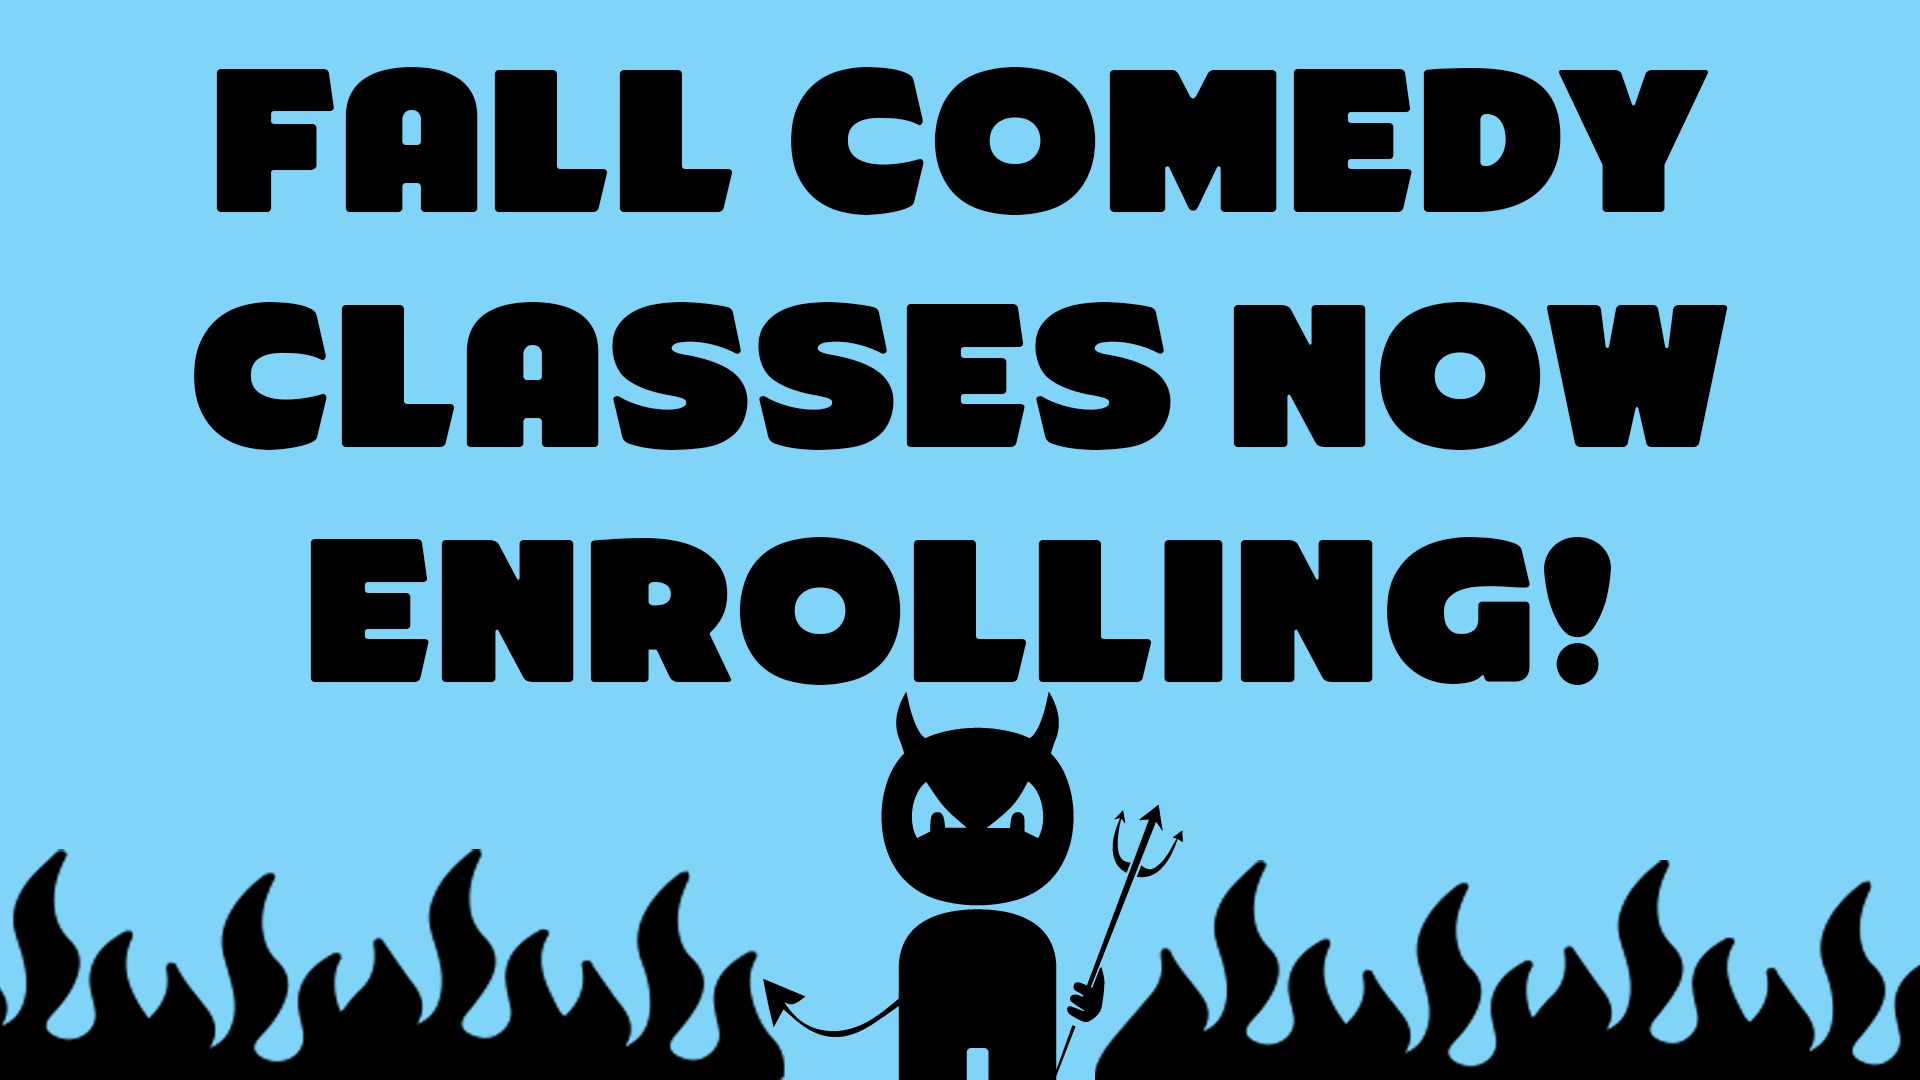 Fall Comedy Classes Now Enrolling!